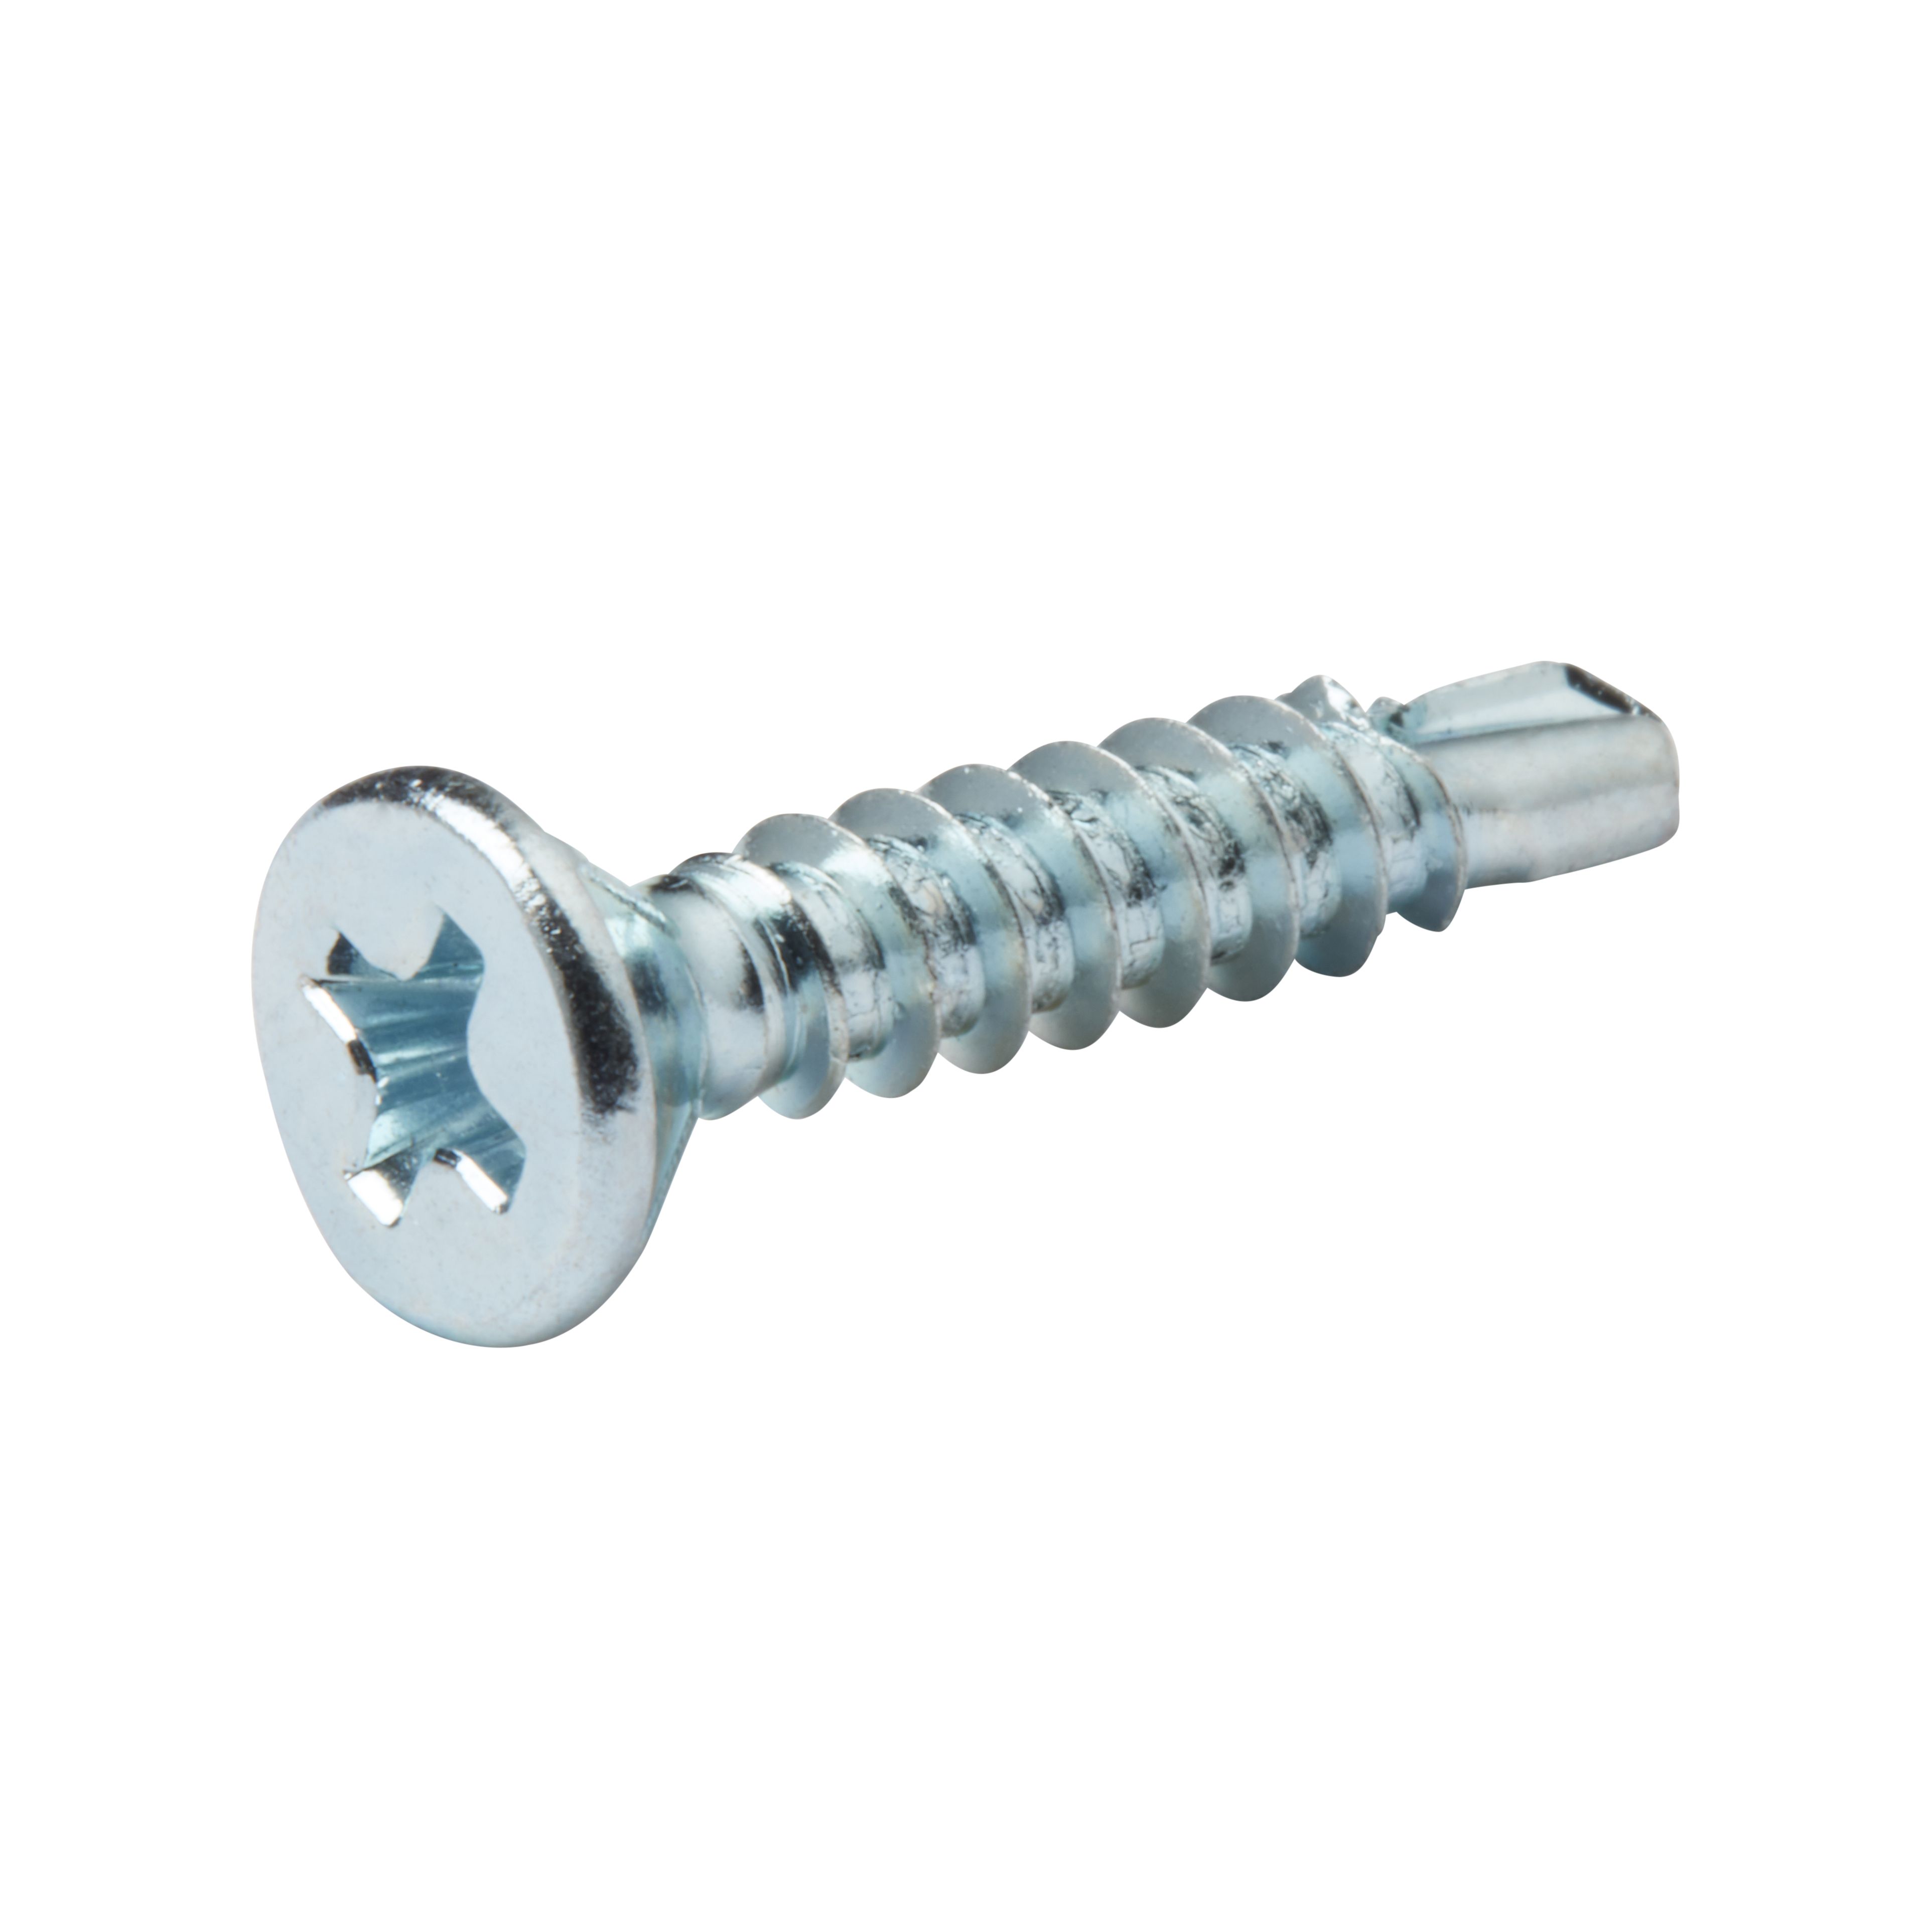 Diall Cruciform Philips Zinc-plated Carbon steel Screw (Dia)3.5mm (L)19mm, Pack of 25